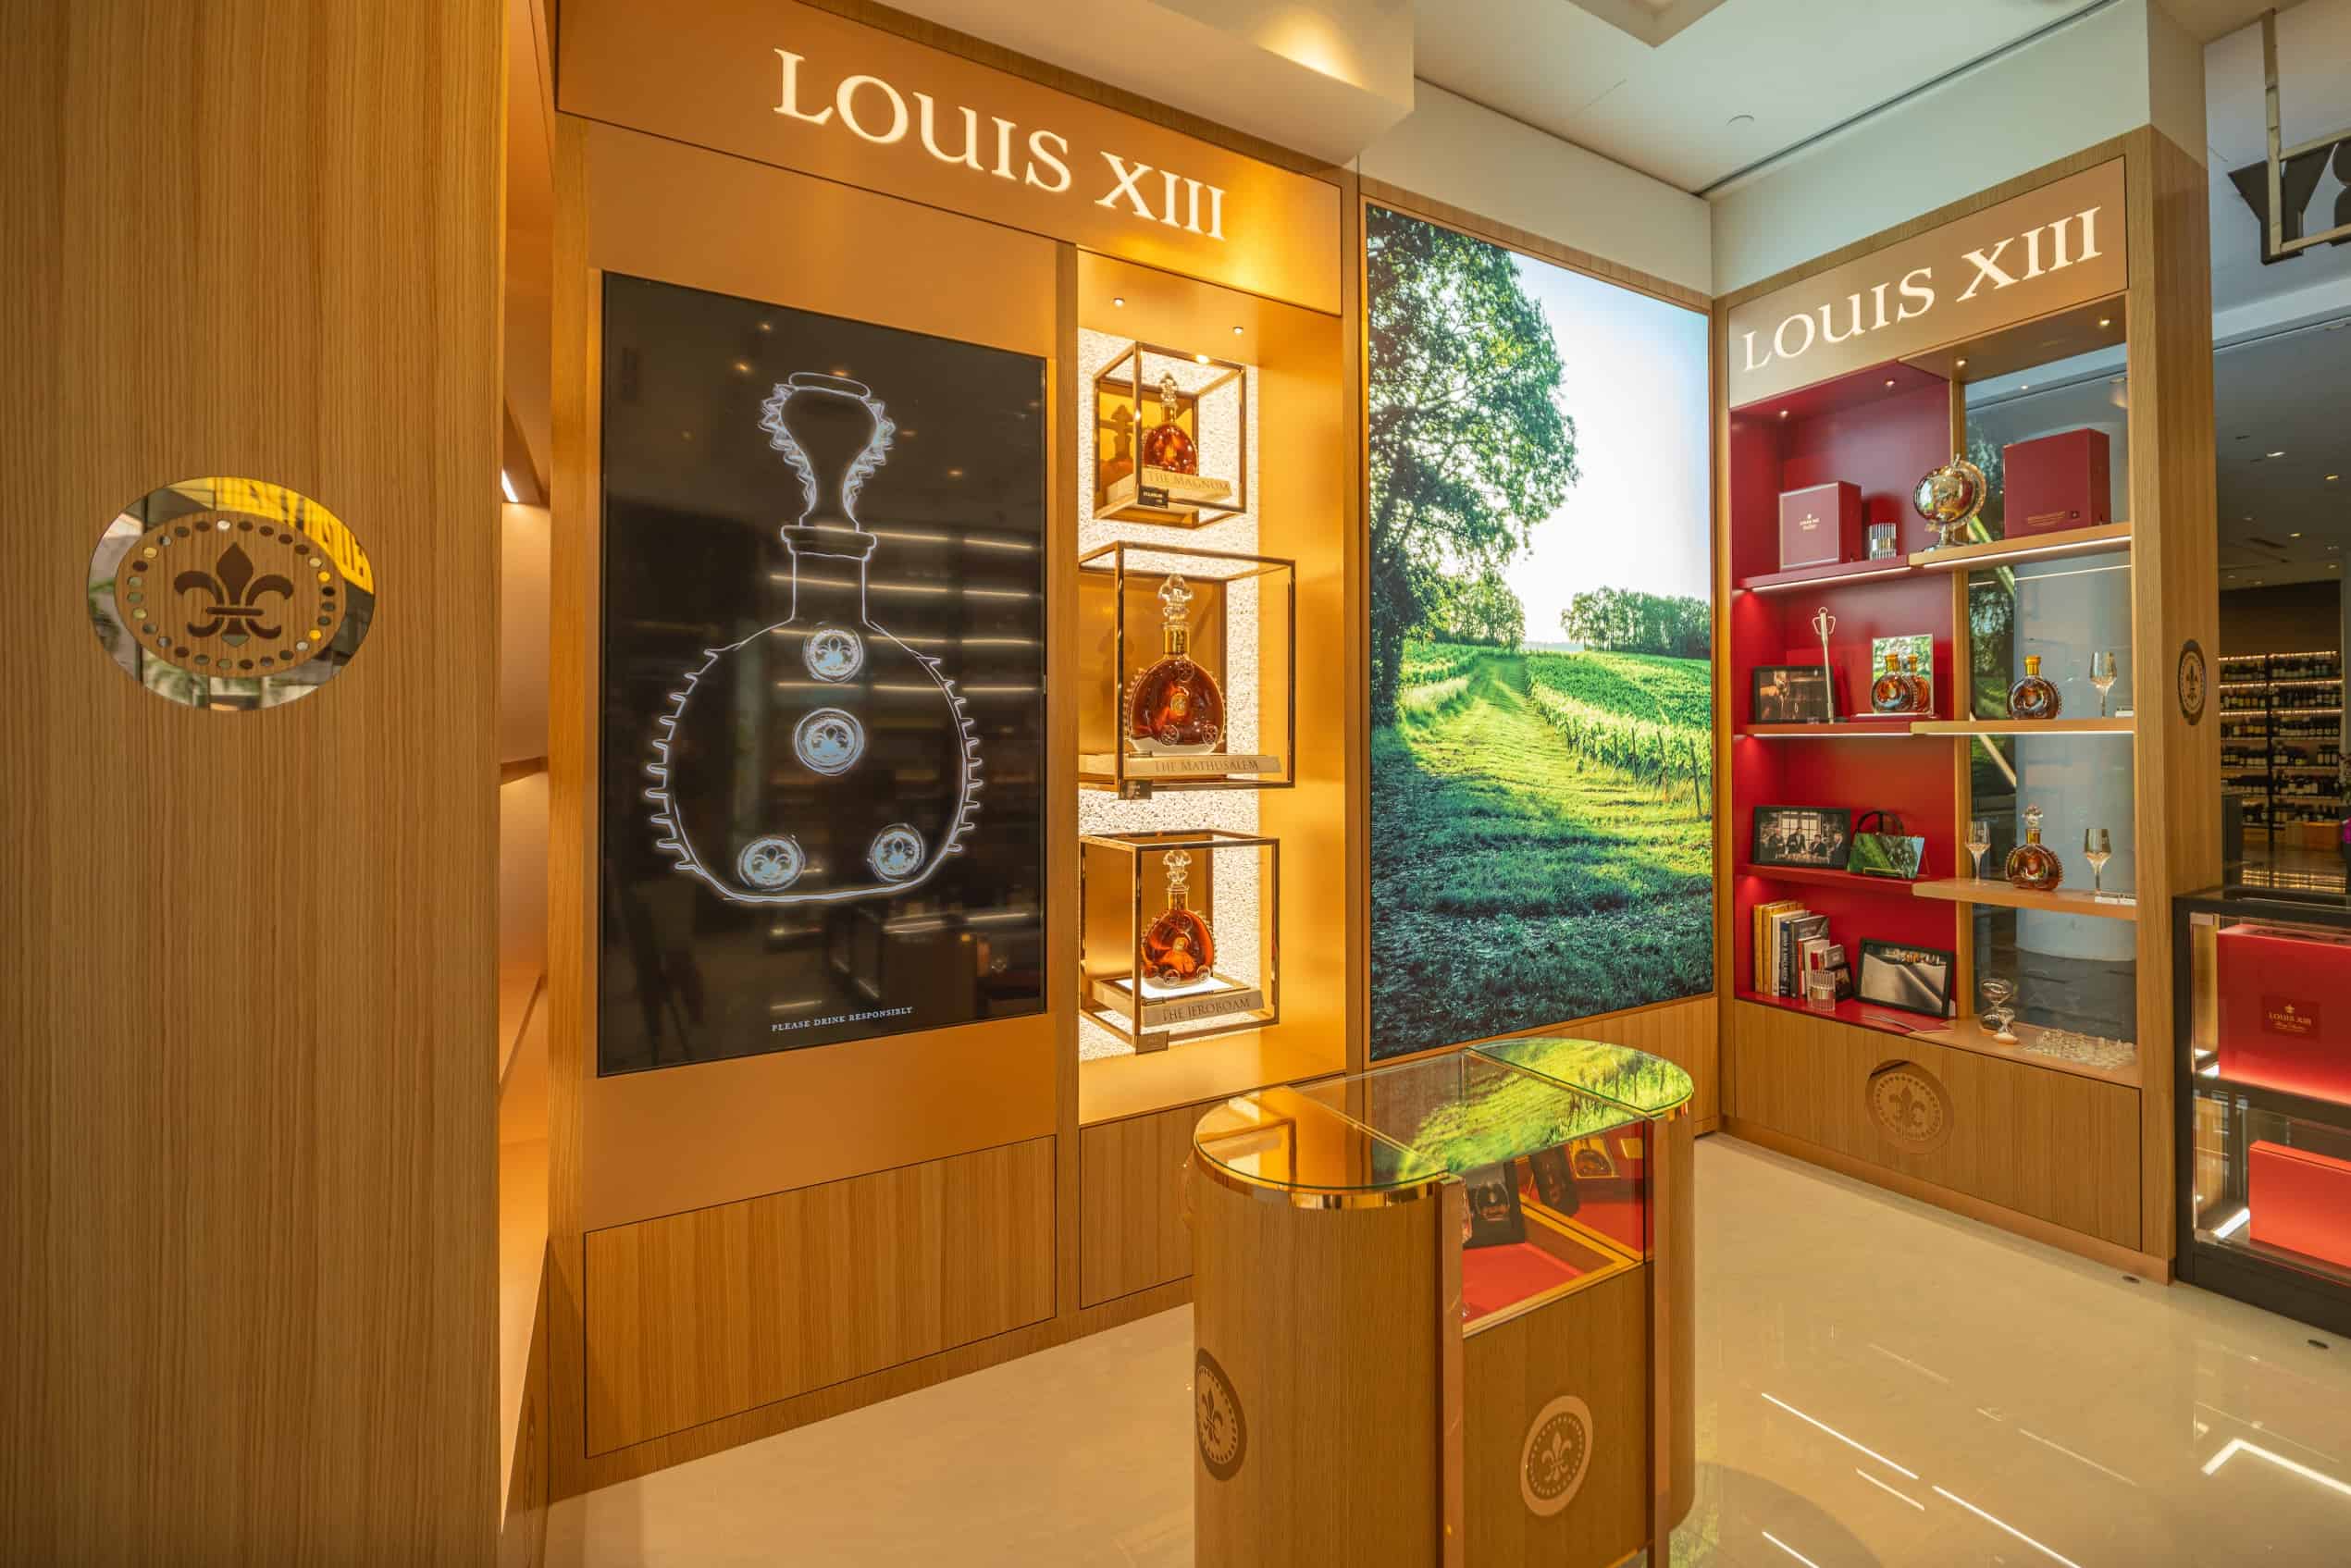 , Premium cognac Louis XIII finds a home in Singapore